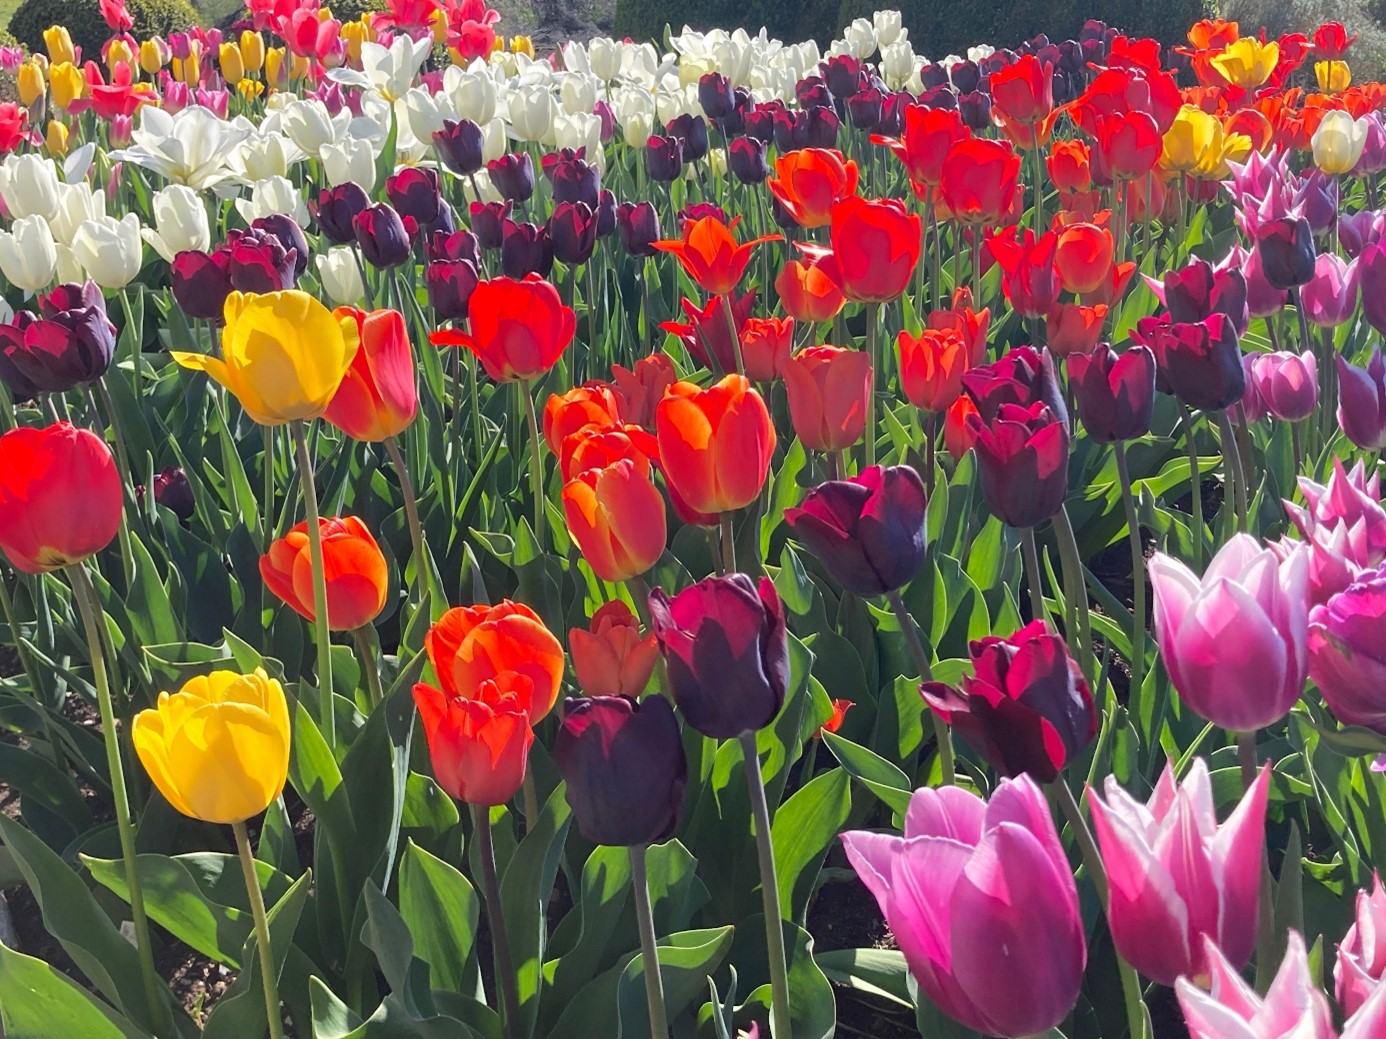 A variety of Tulips were grown this spring for cut flowers 